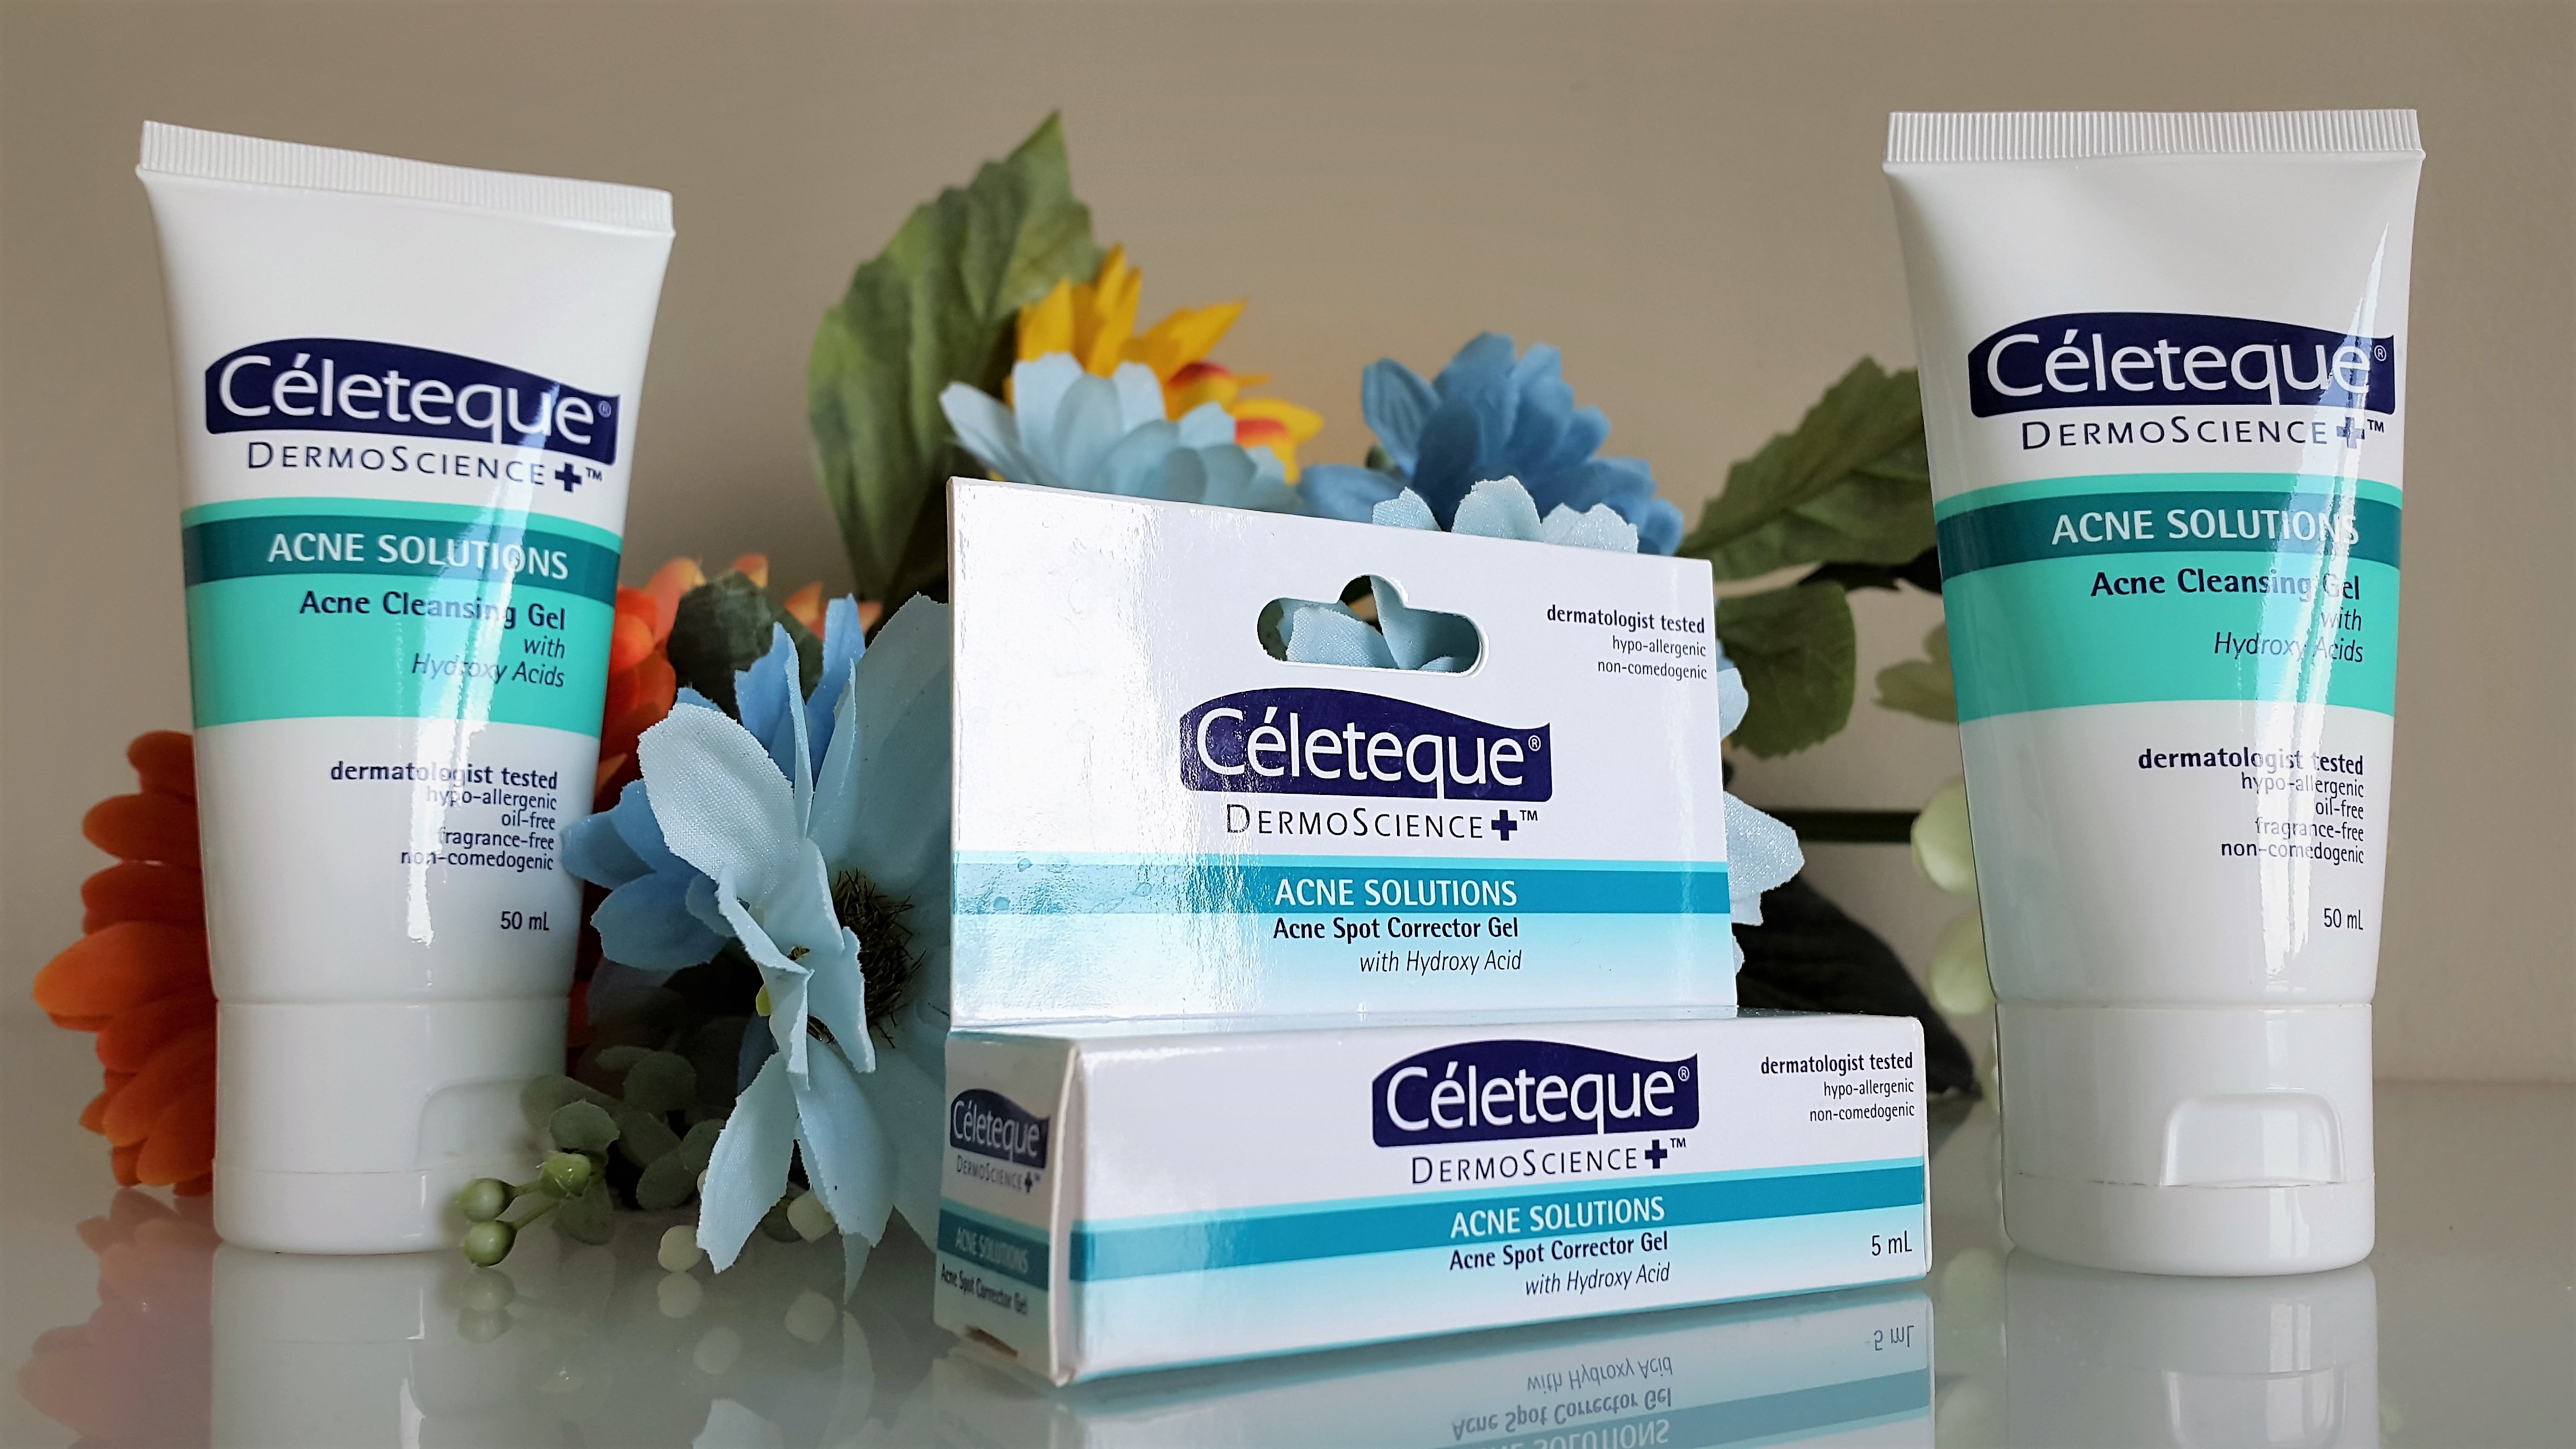 Celeteque Acne Solutions Acne Cleansing Gel